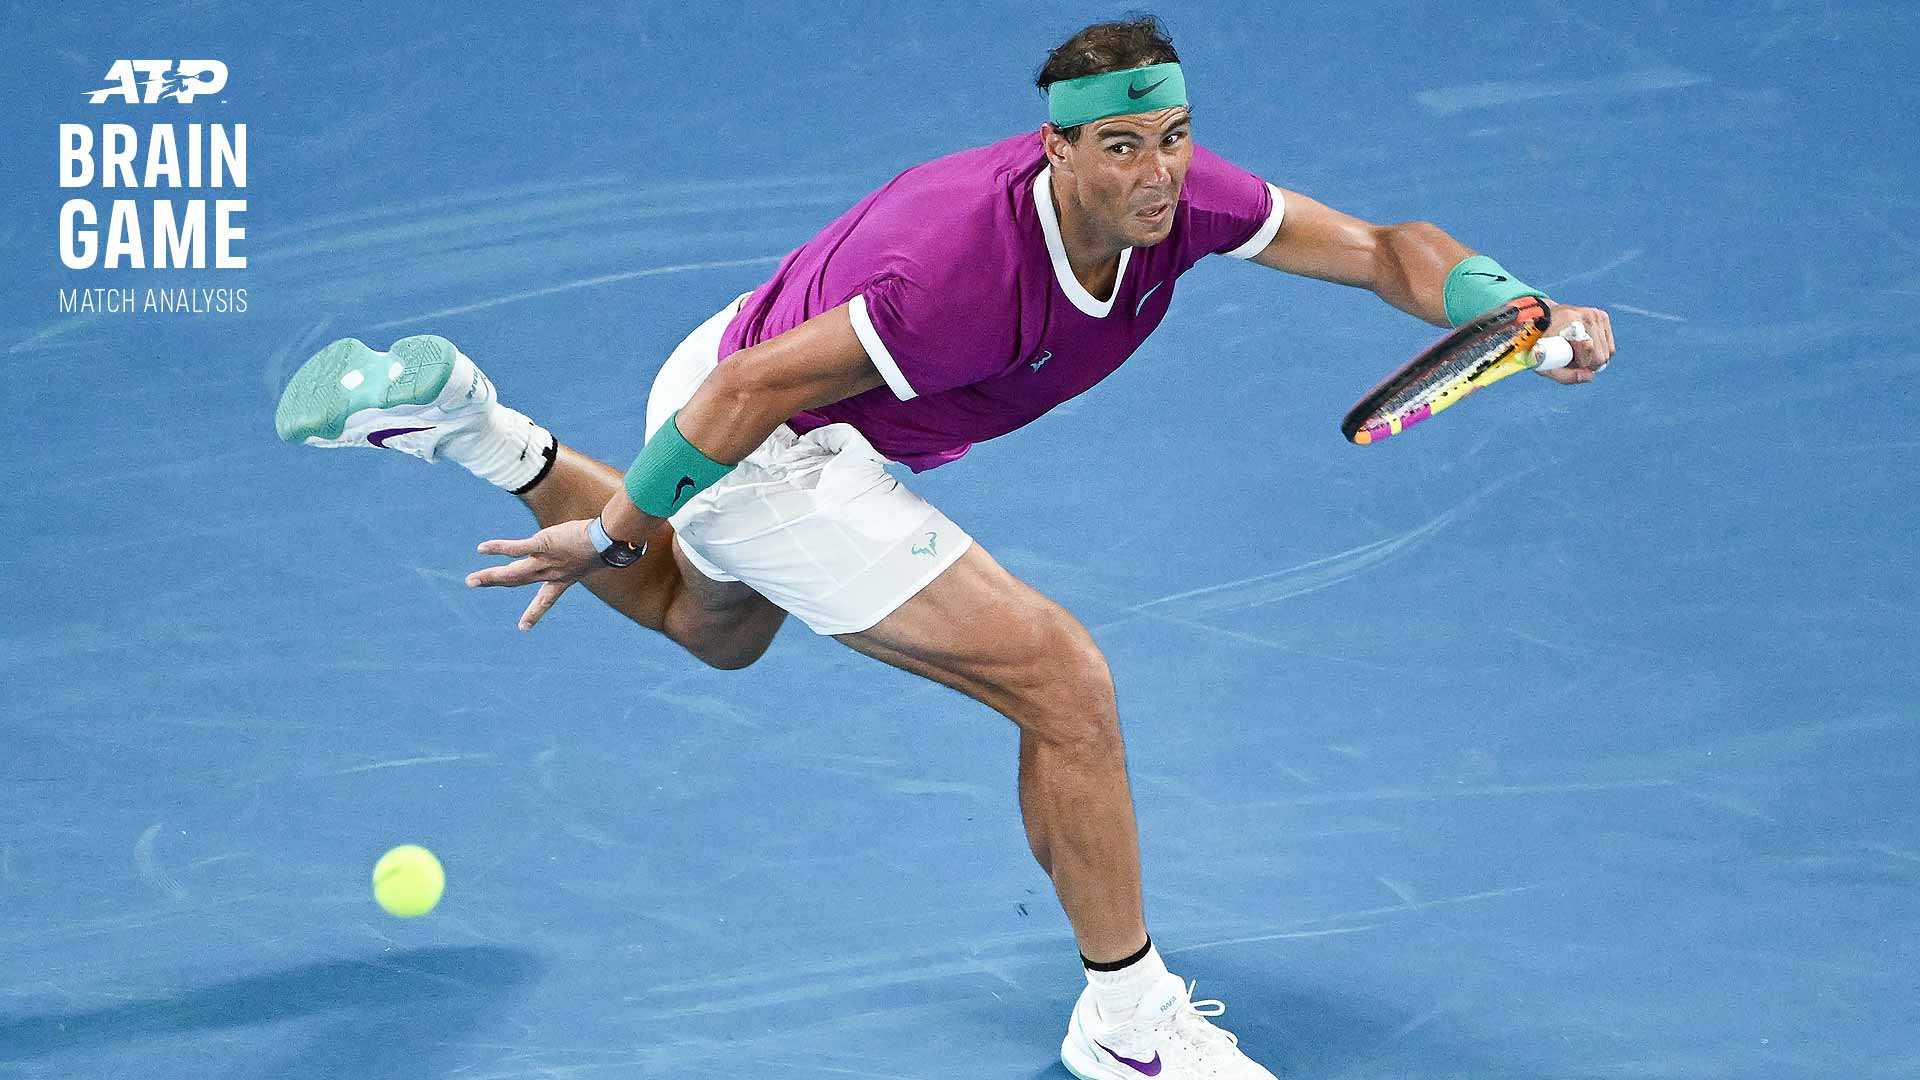 Brain Game How Rafael Nadal Powered Up For Record-Breaking Australian Open Title ATP Tour Tennis